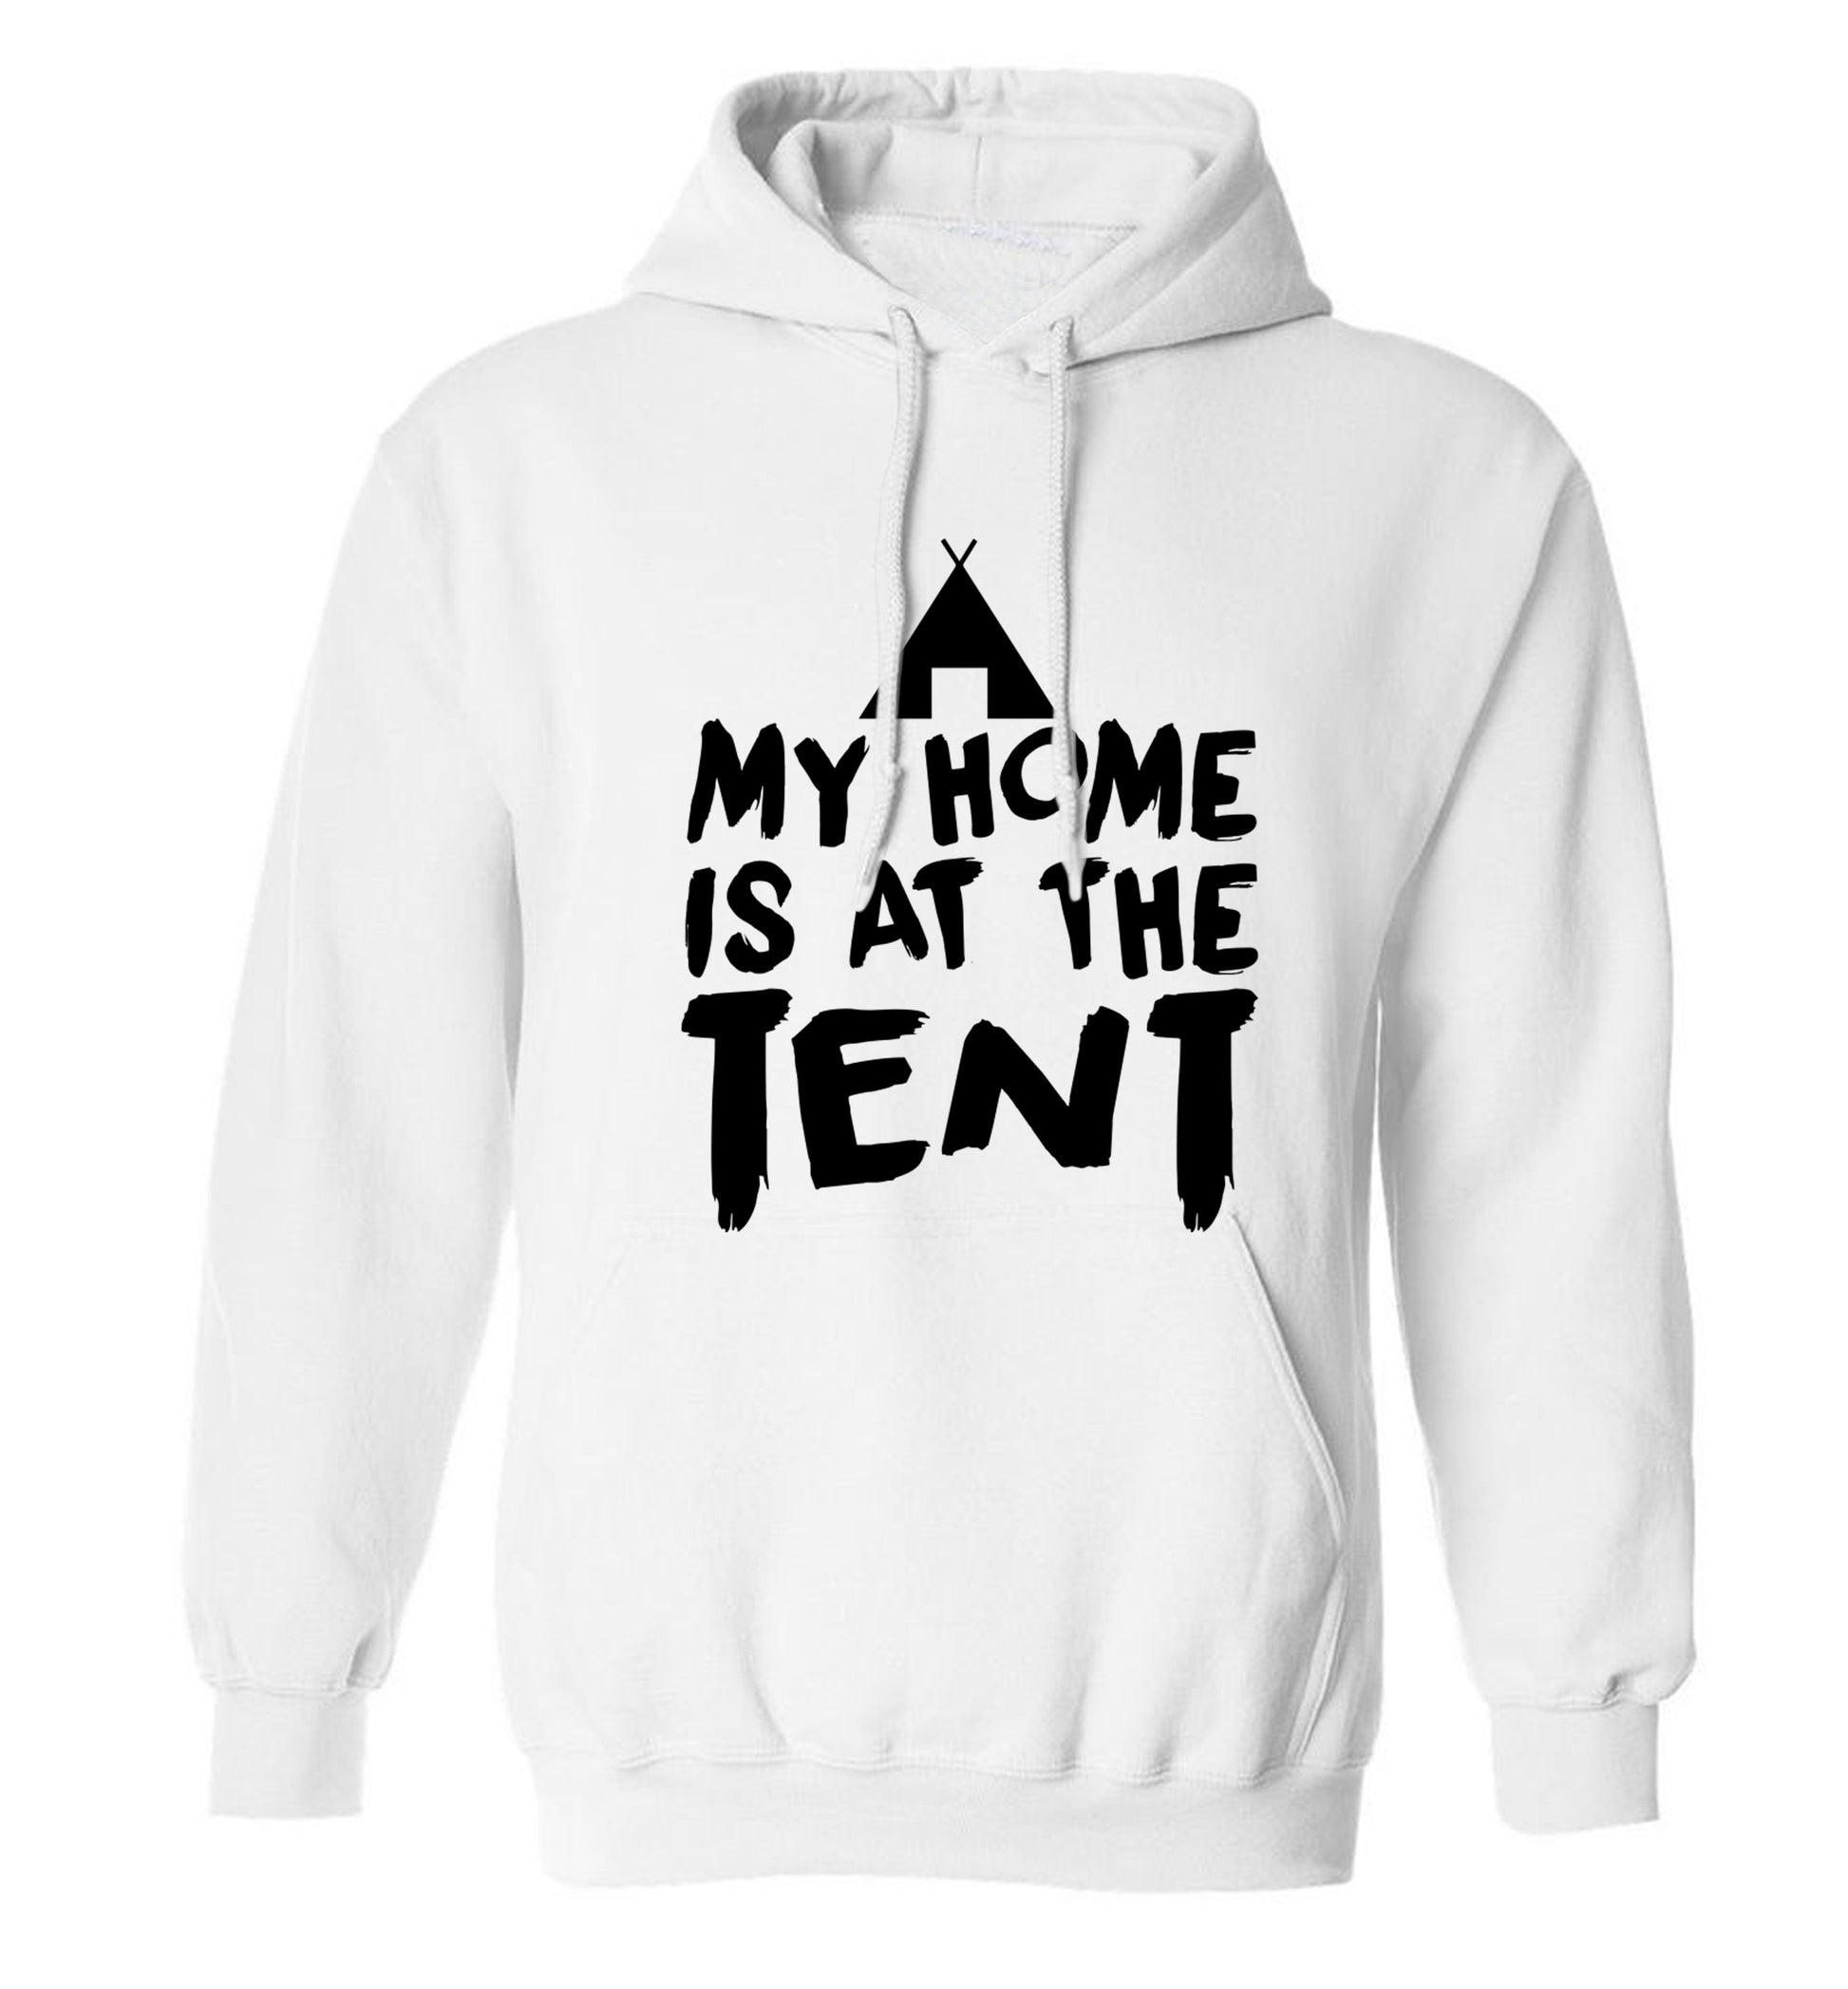 My home is at the tent adults unisex white hoodie 2XL